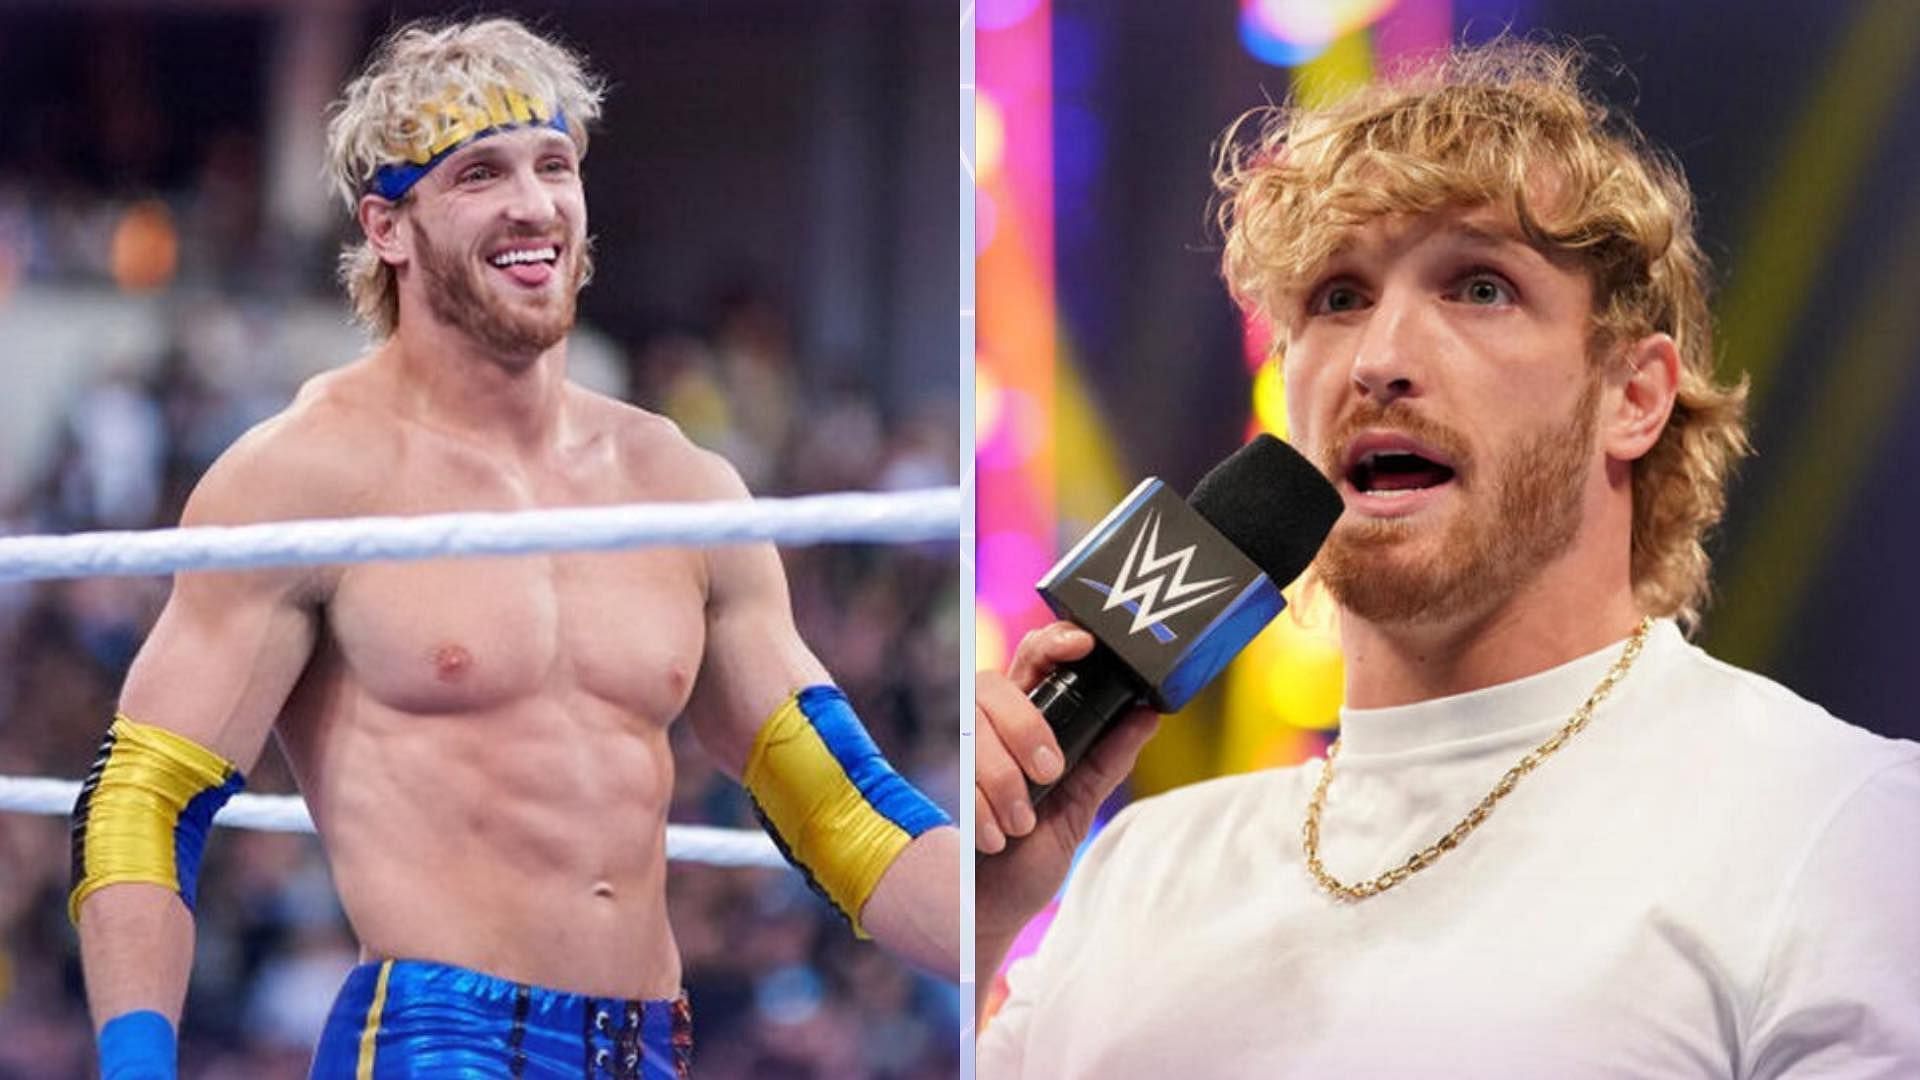 Logan Paul will be returning to WWE after over two months